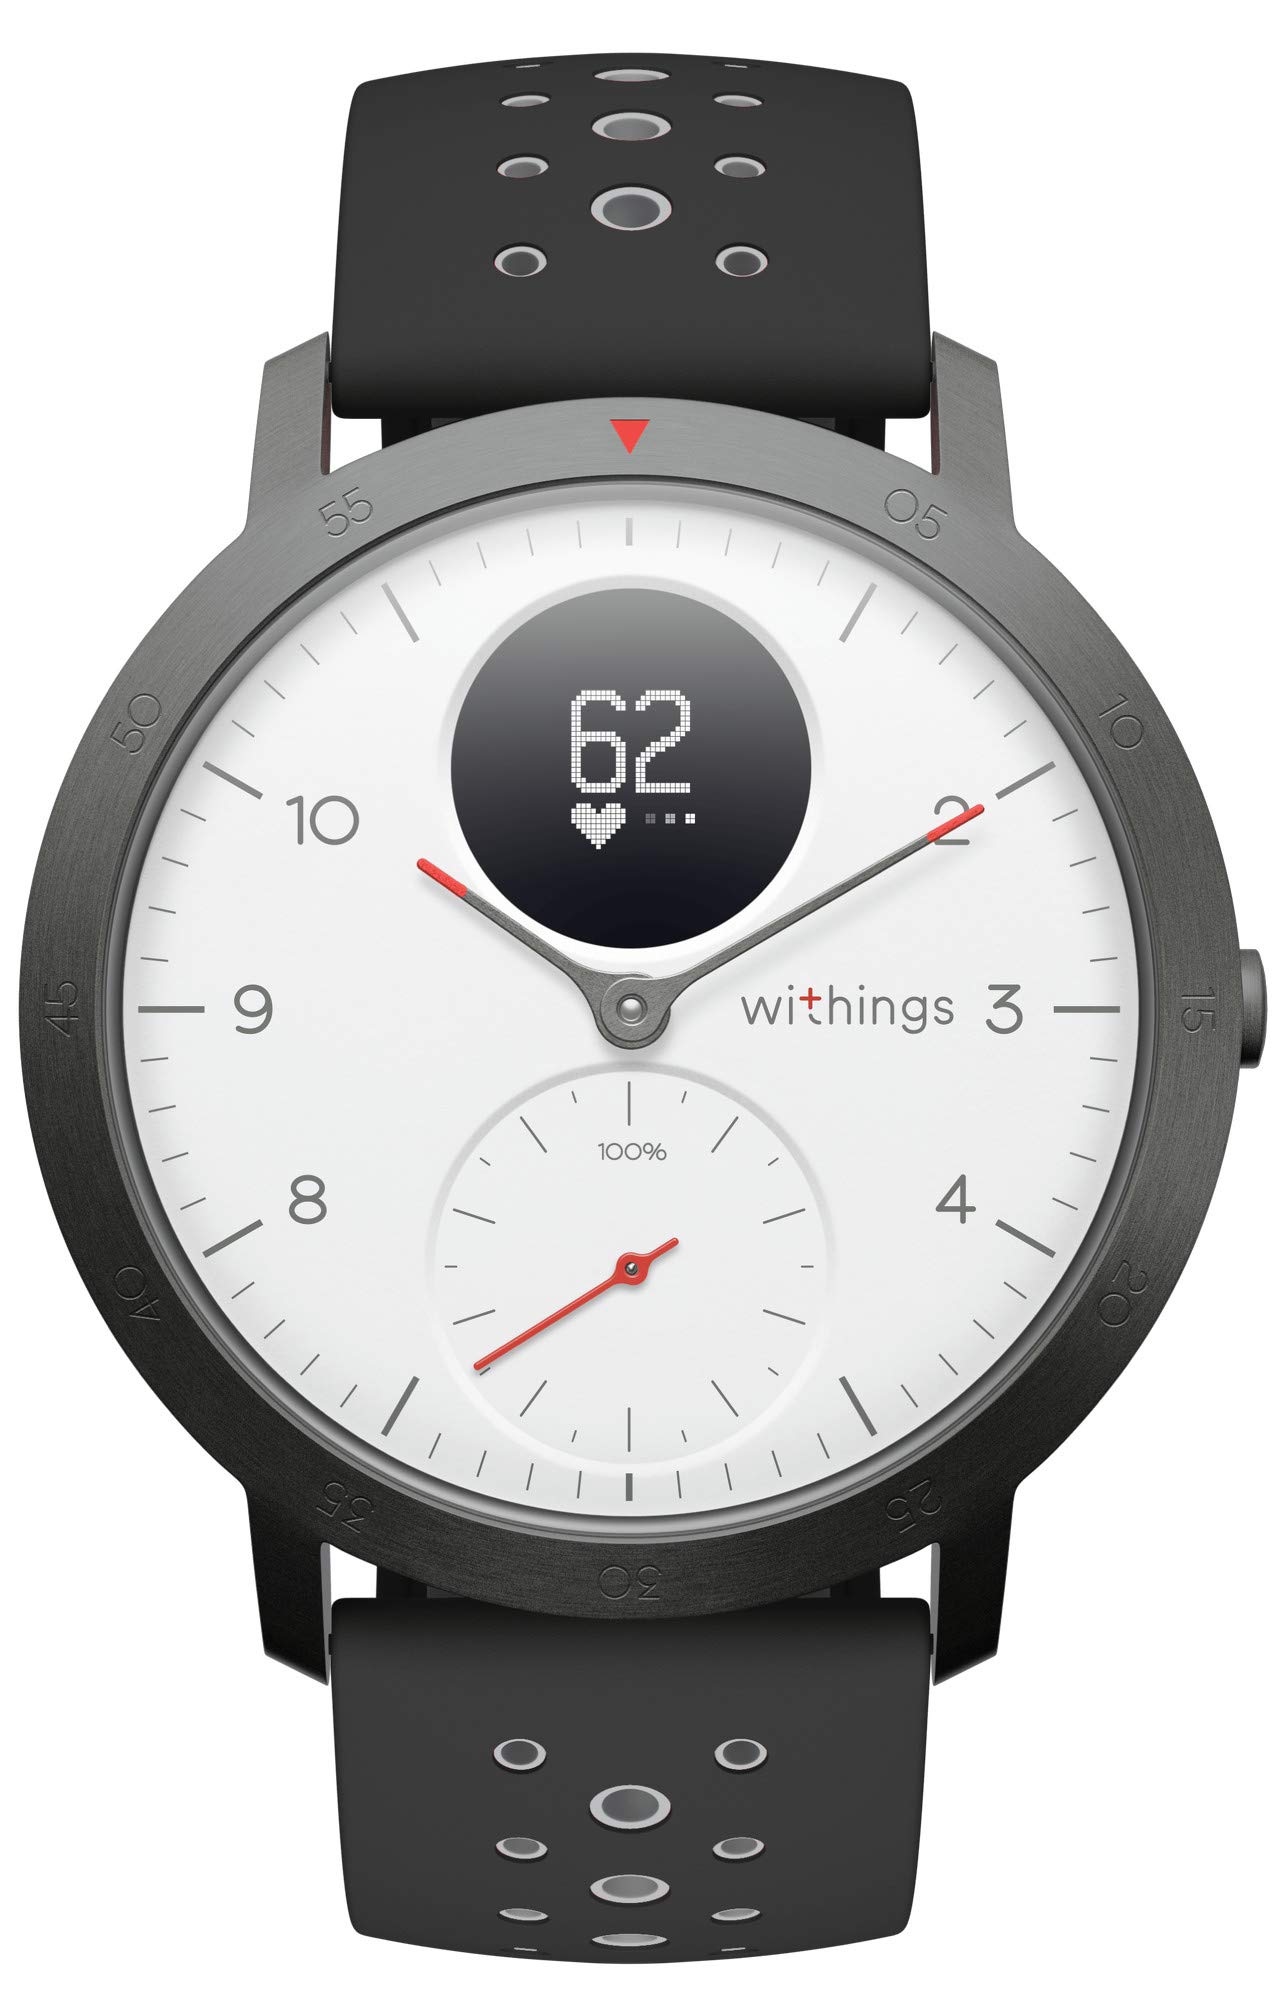 Withings Steel HR Sport - Multisport hybrid Smartwatch, connected GPS, heart rate, fitness level via VO2 max, activity and sleep tracking, notifications